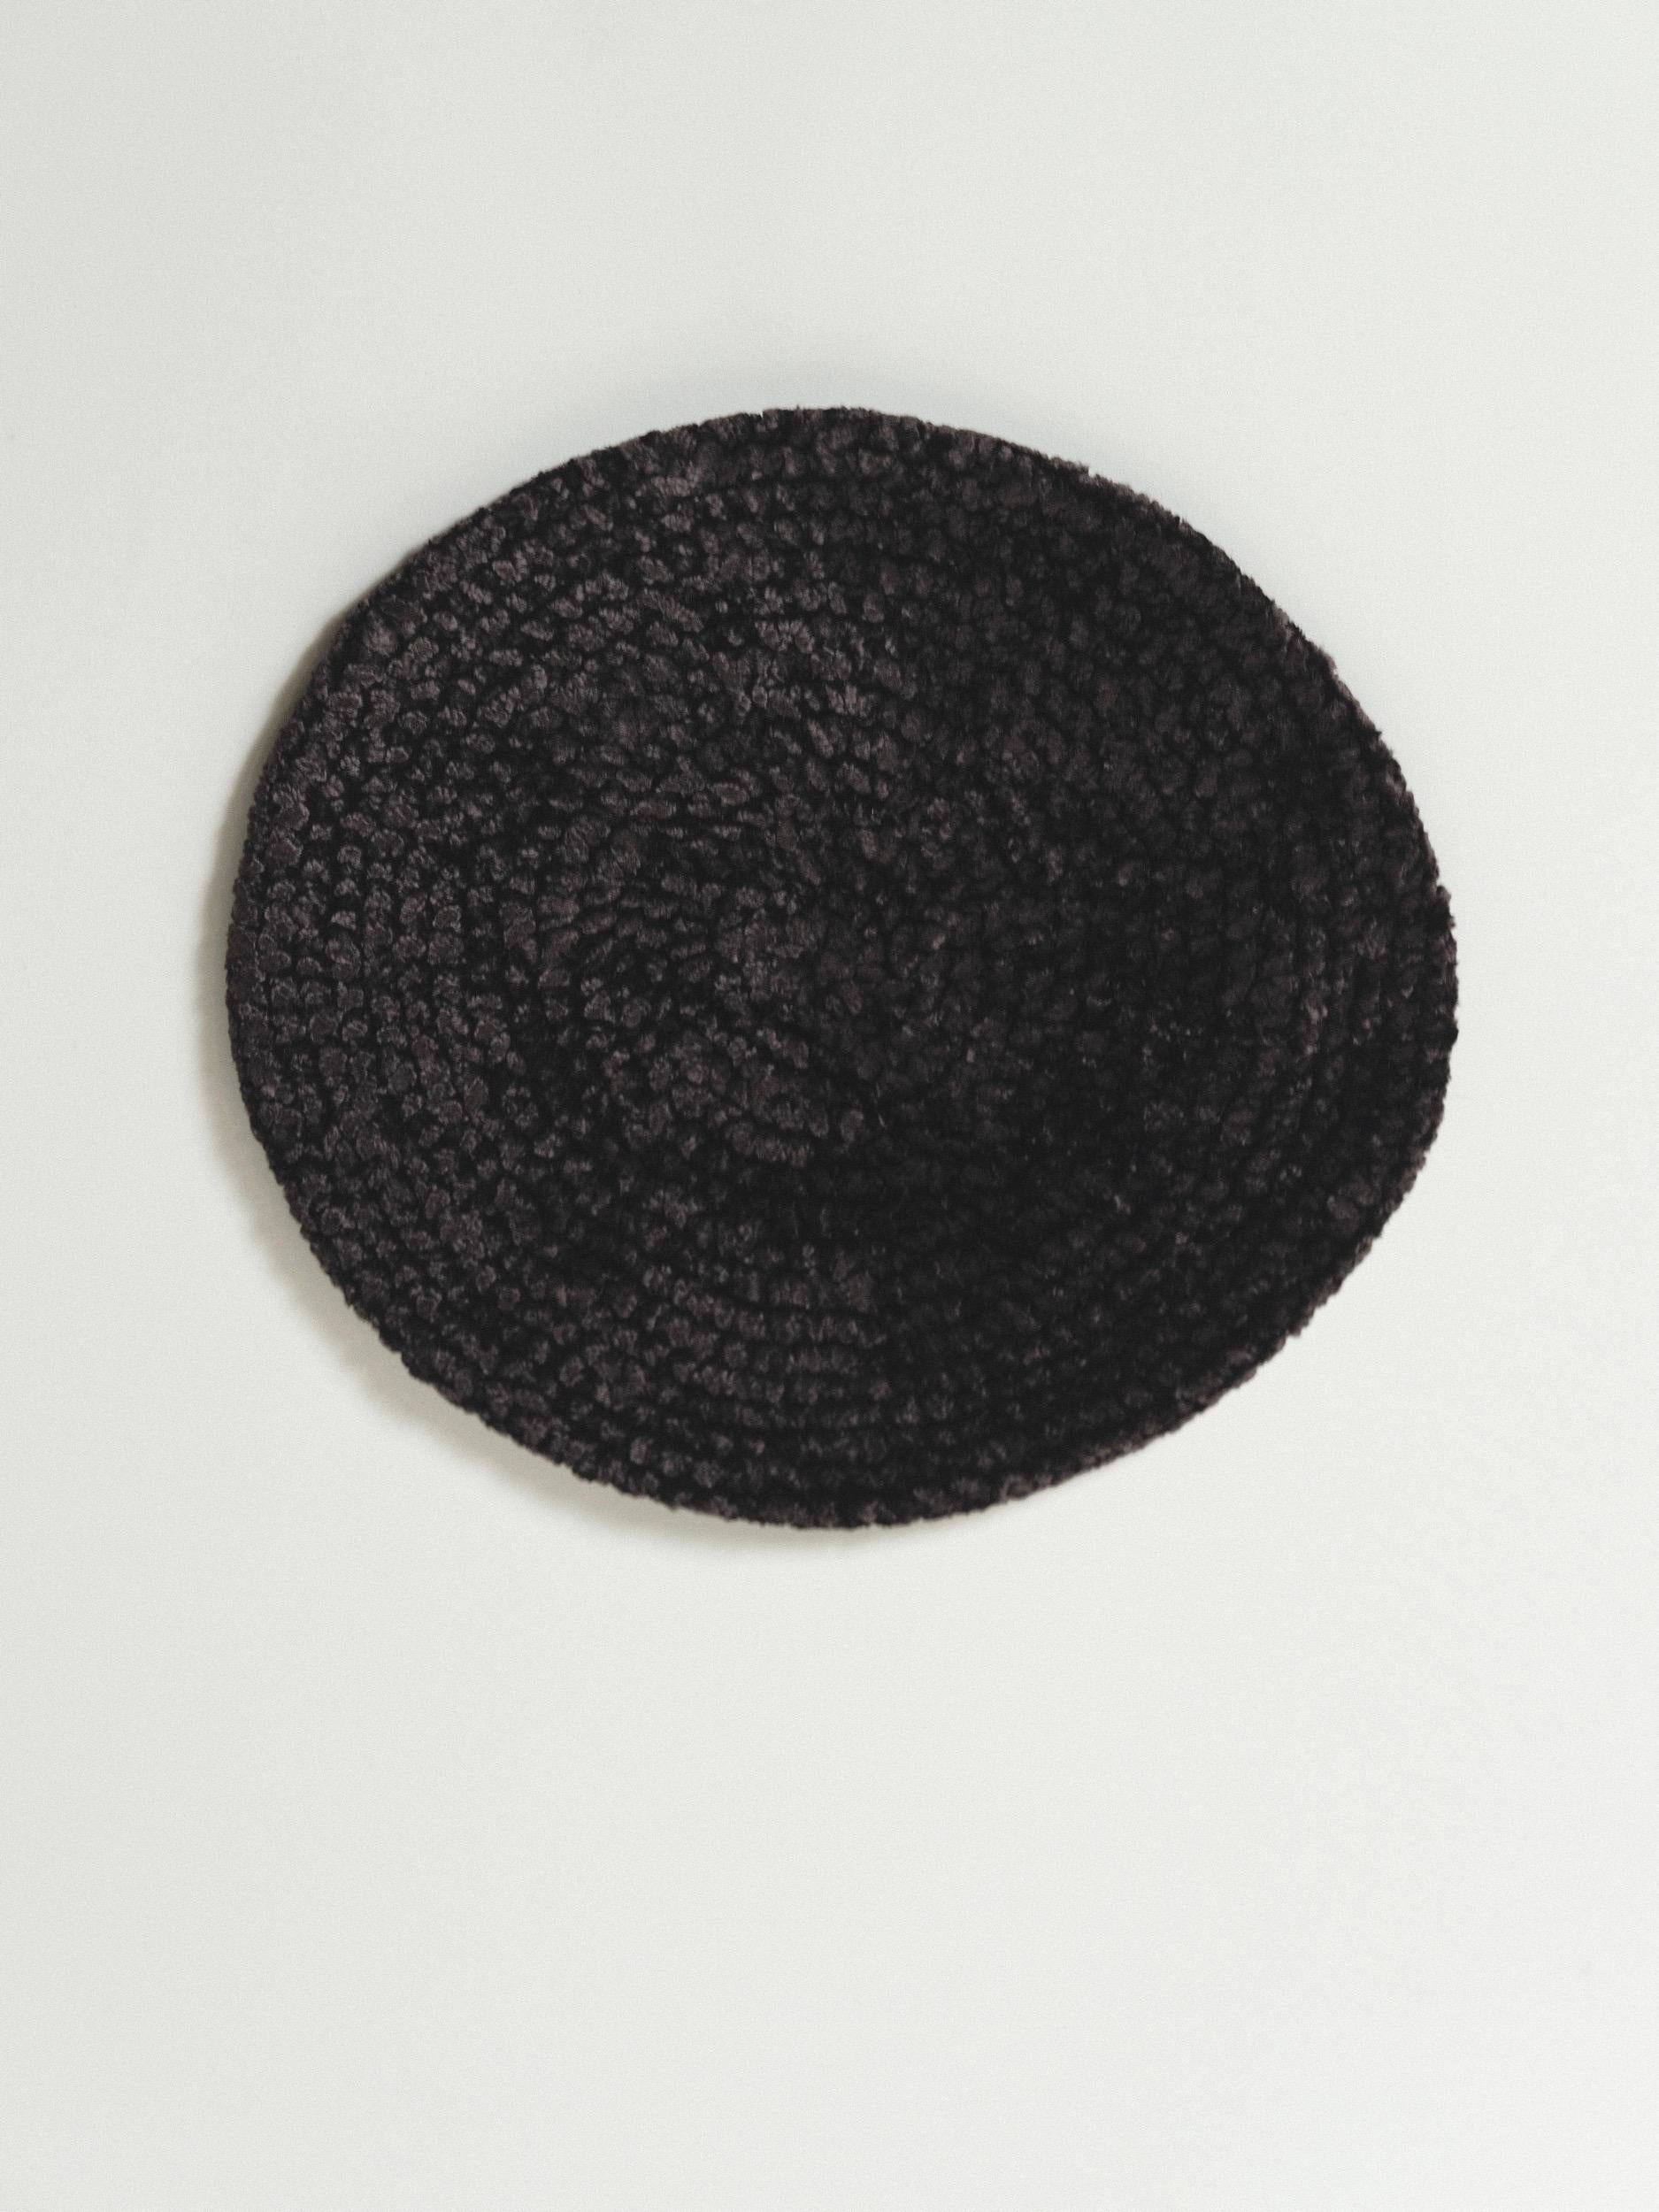 Brown/Black Donna Karan Chenille Beret Hat Fall Winter 1993 Documented  In Good Condition For Sale In Los Angeles, CA